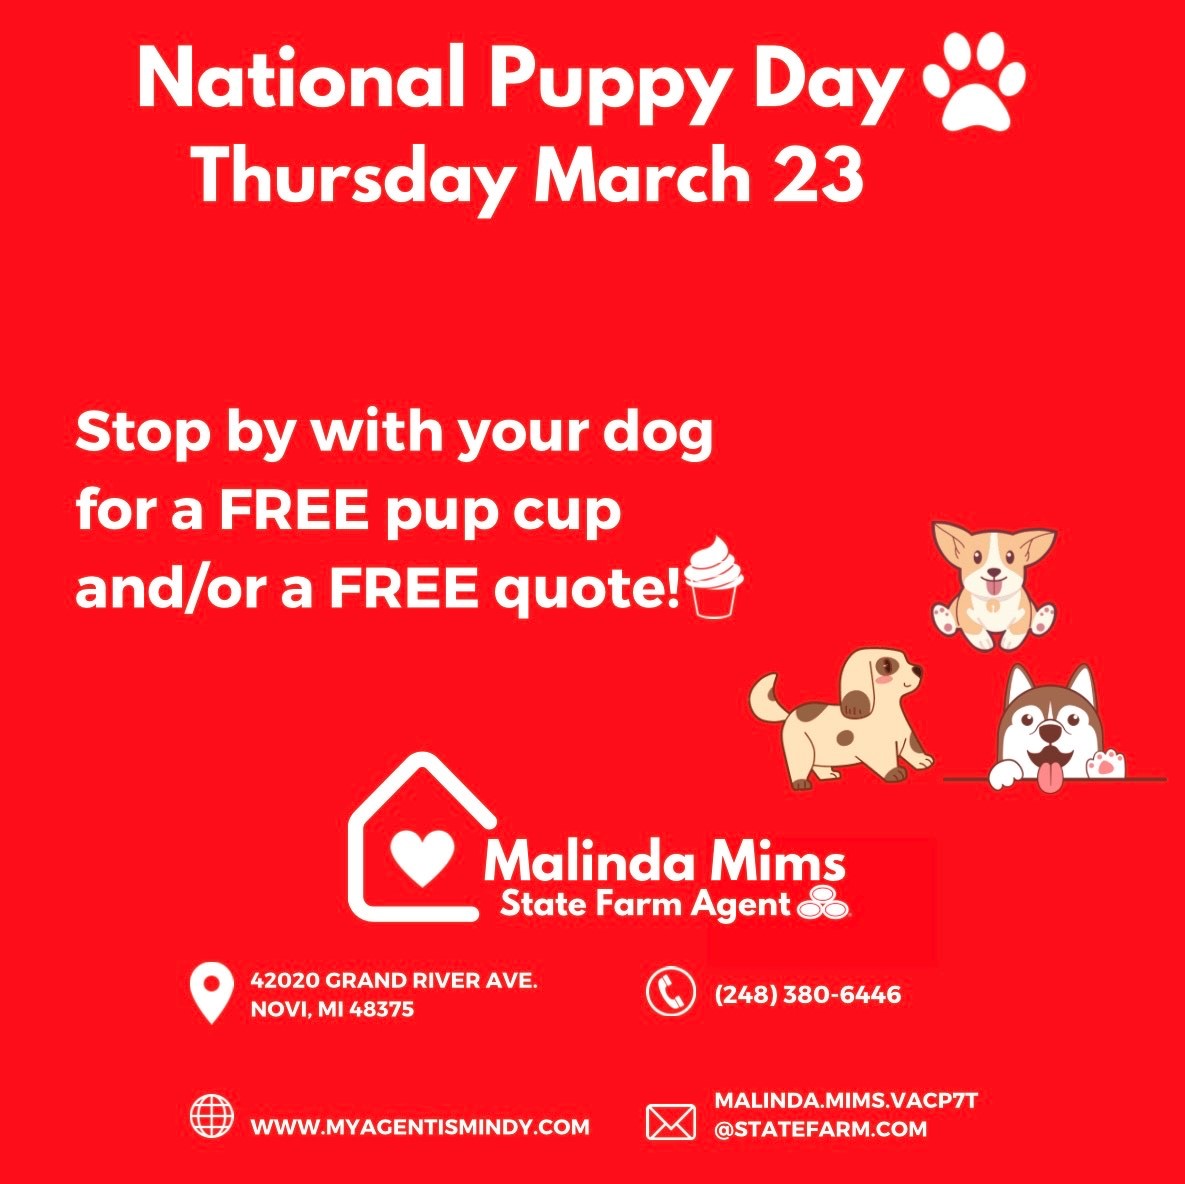 SAVE THE DATE MARCH 23rd!!! Come on down to the office to say hi with your dogs and get a FREE pup cup! Show some love this National Puppy Day!❤️❤️ #NationalPuppyDay #PuppyAppreciation #StateFarm #PetInsurance #NoviMichigan #FarmingtonHIlls #Farmington #freepupcup